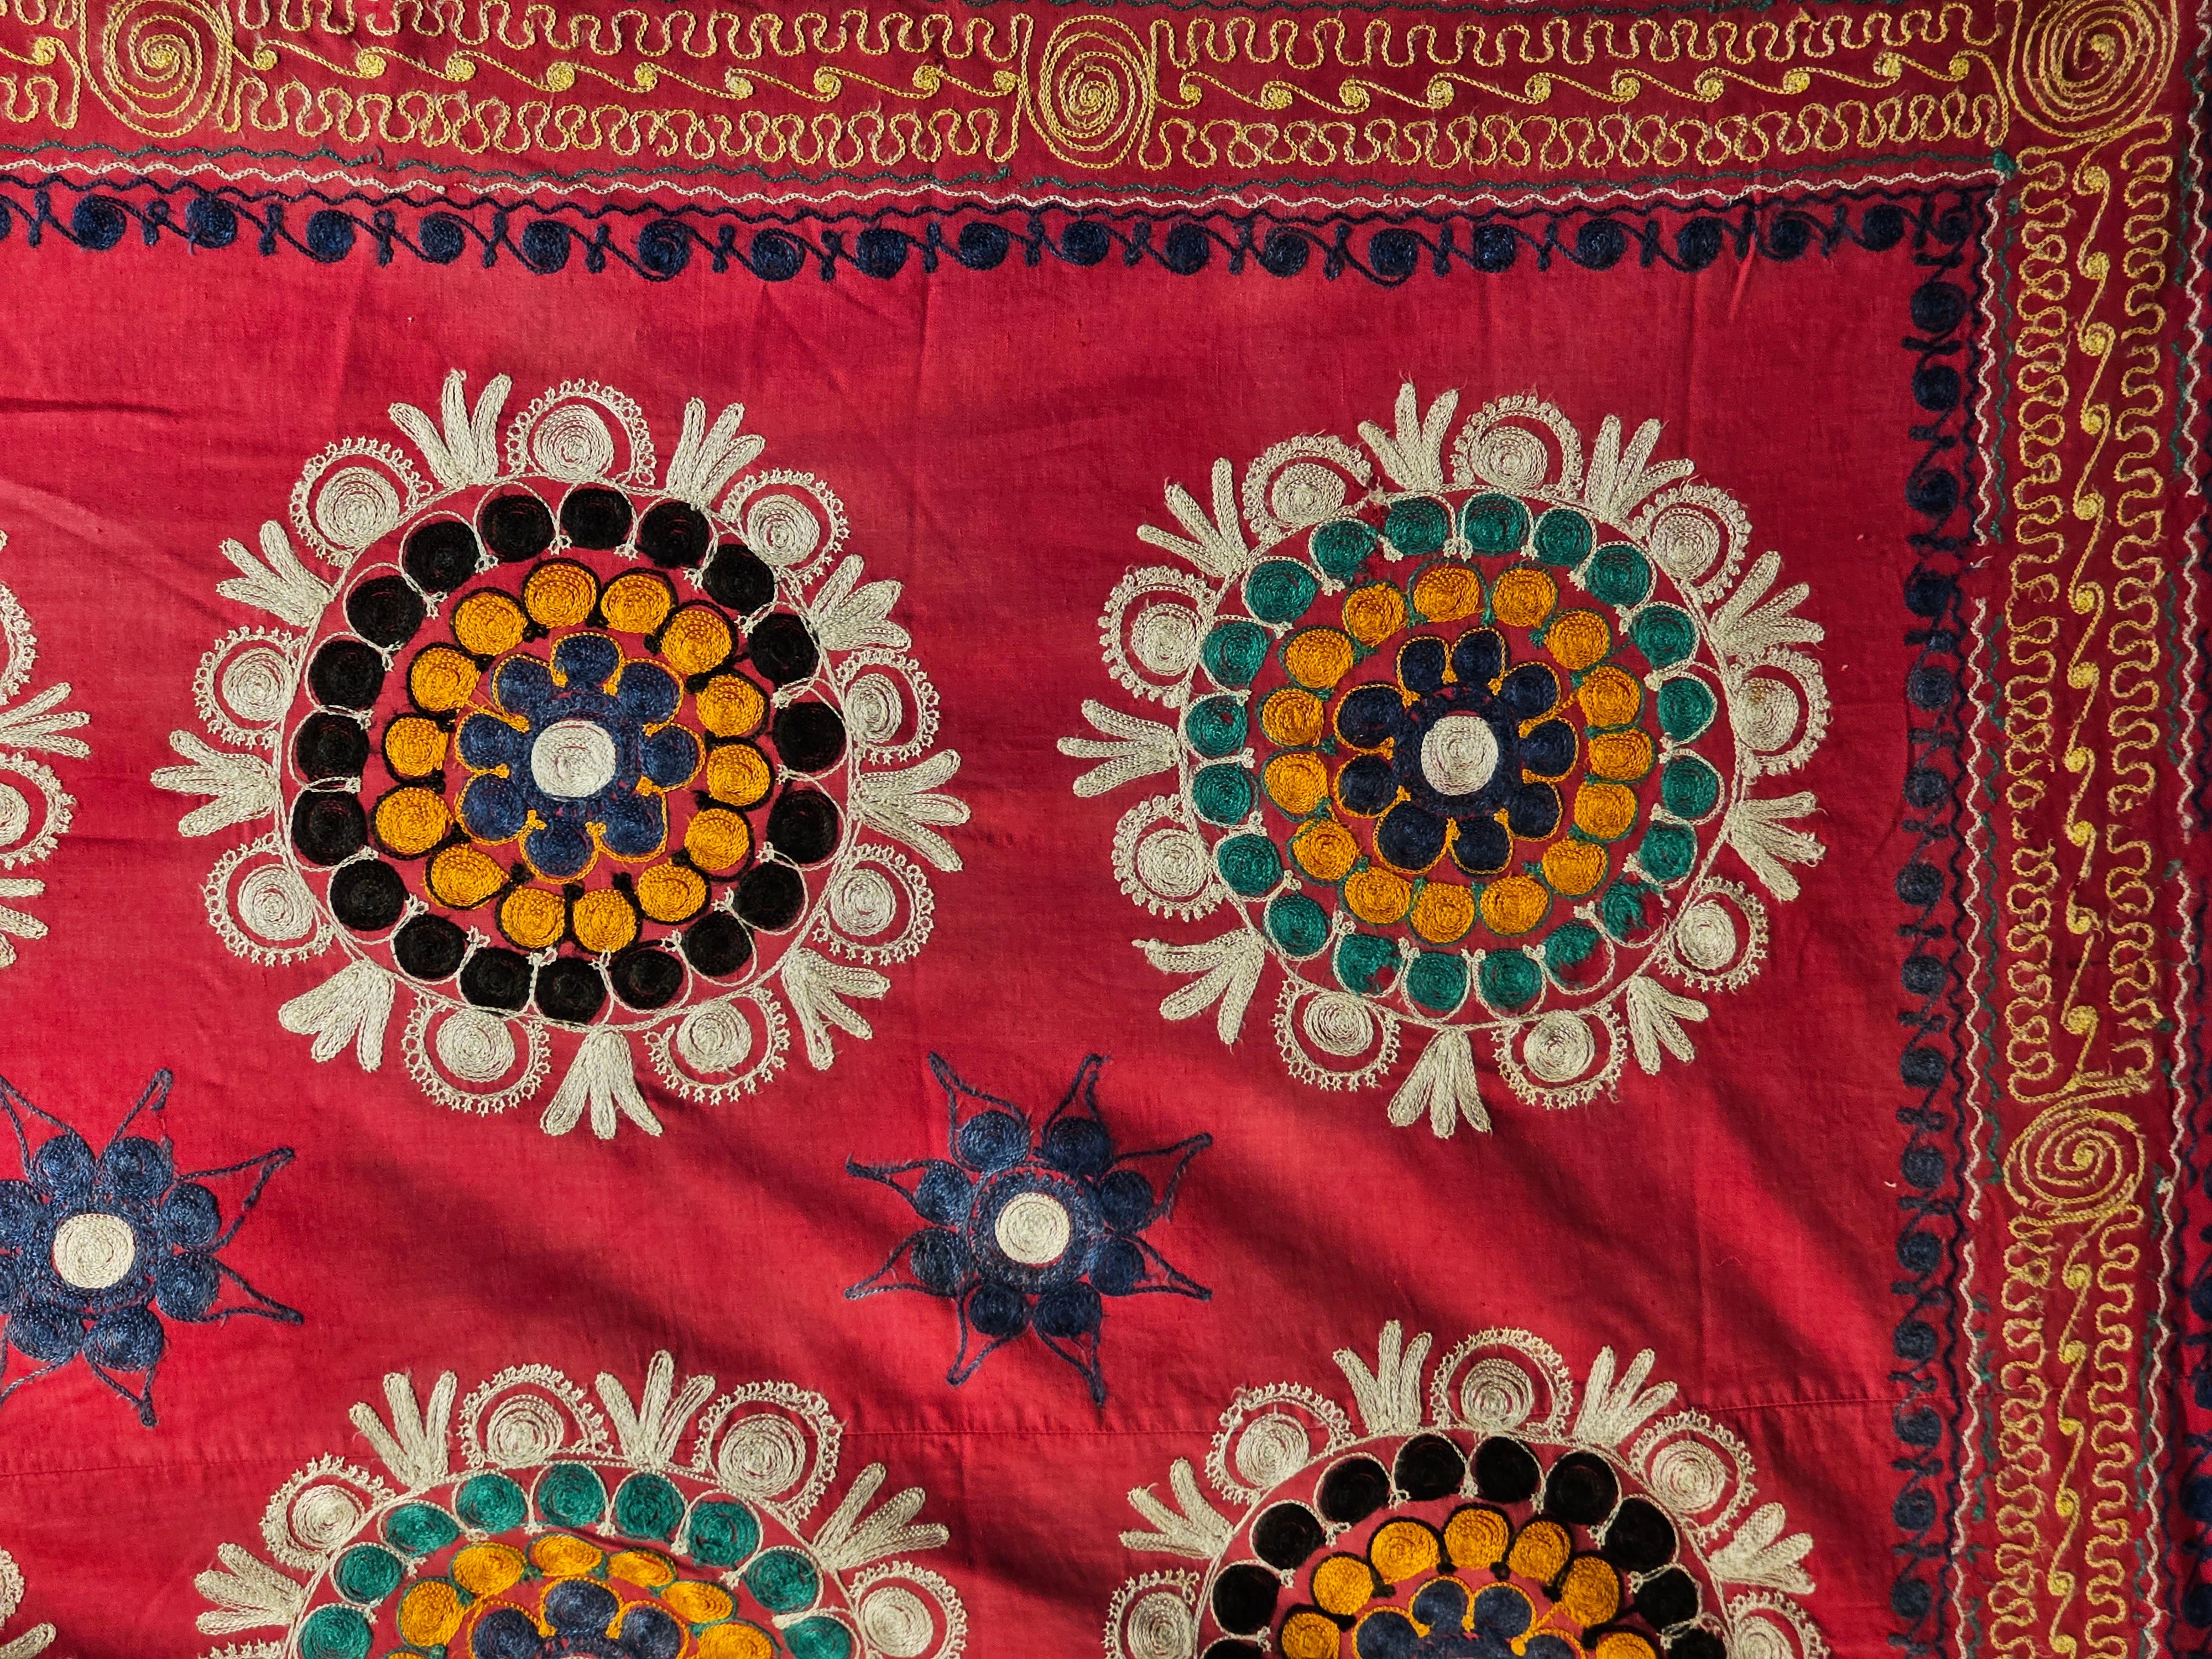 Hand-Crafted Mid 20th Century Hand Crafted Uzbek Suzani Silk Embroidery in Red, ivory, Green For Sale